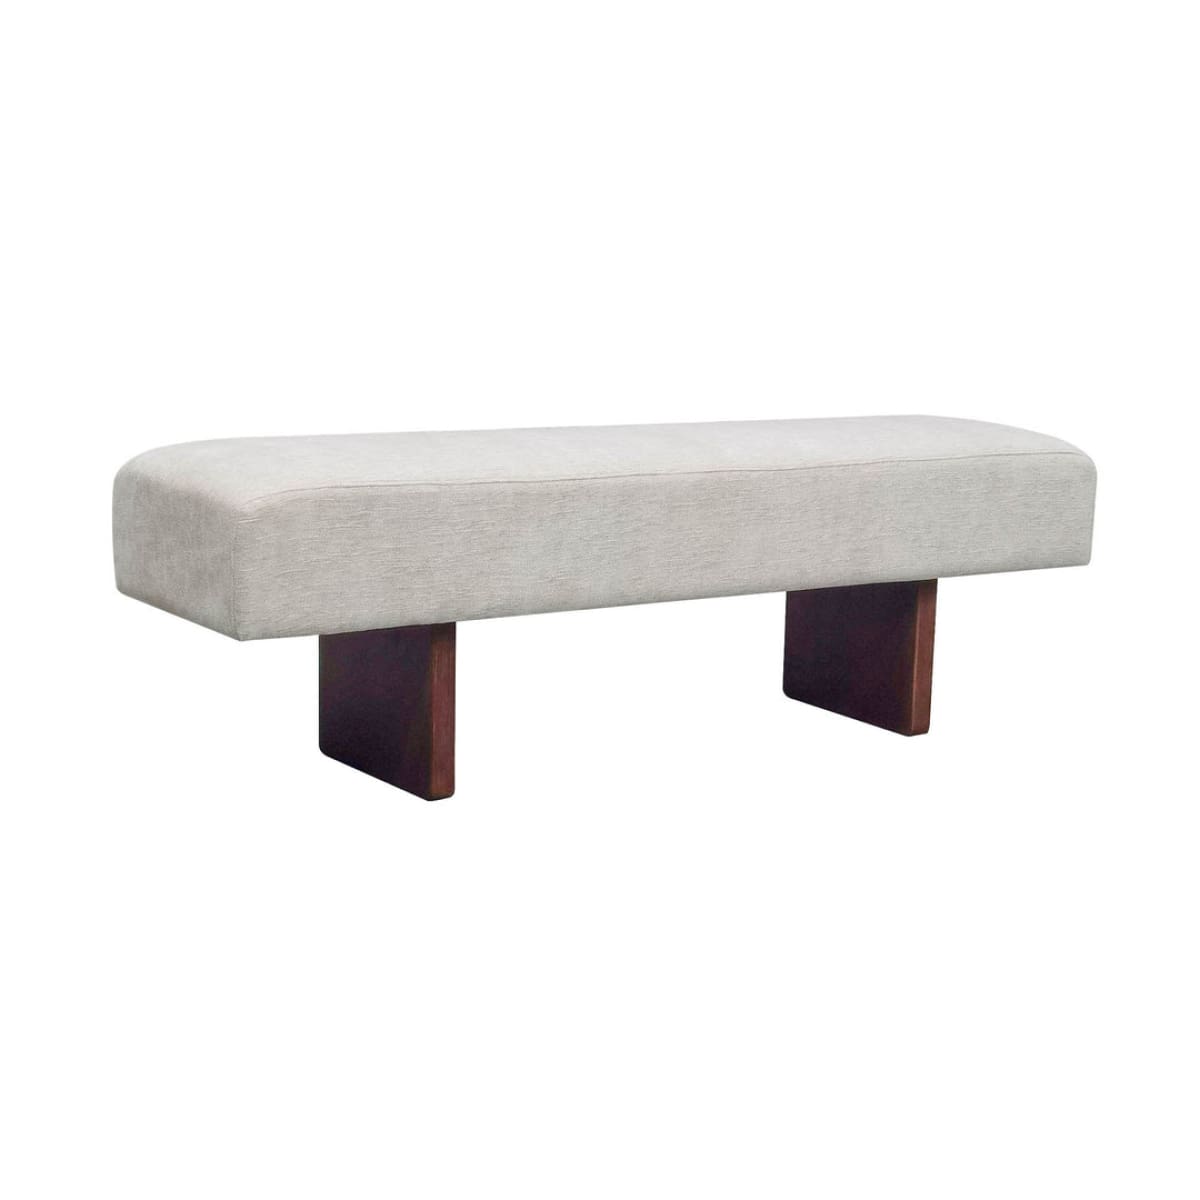 Francesca Bench - lh-import-dining-benches